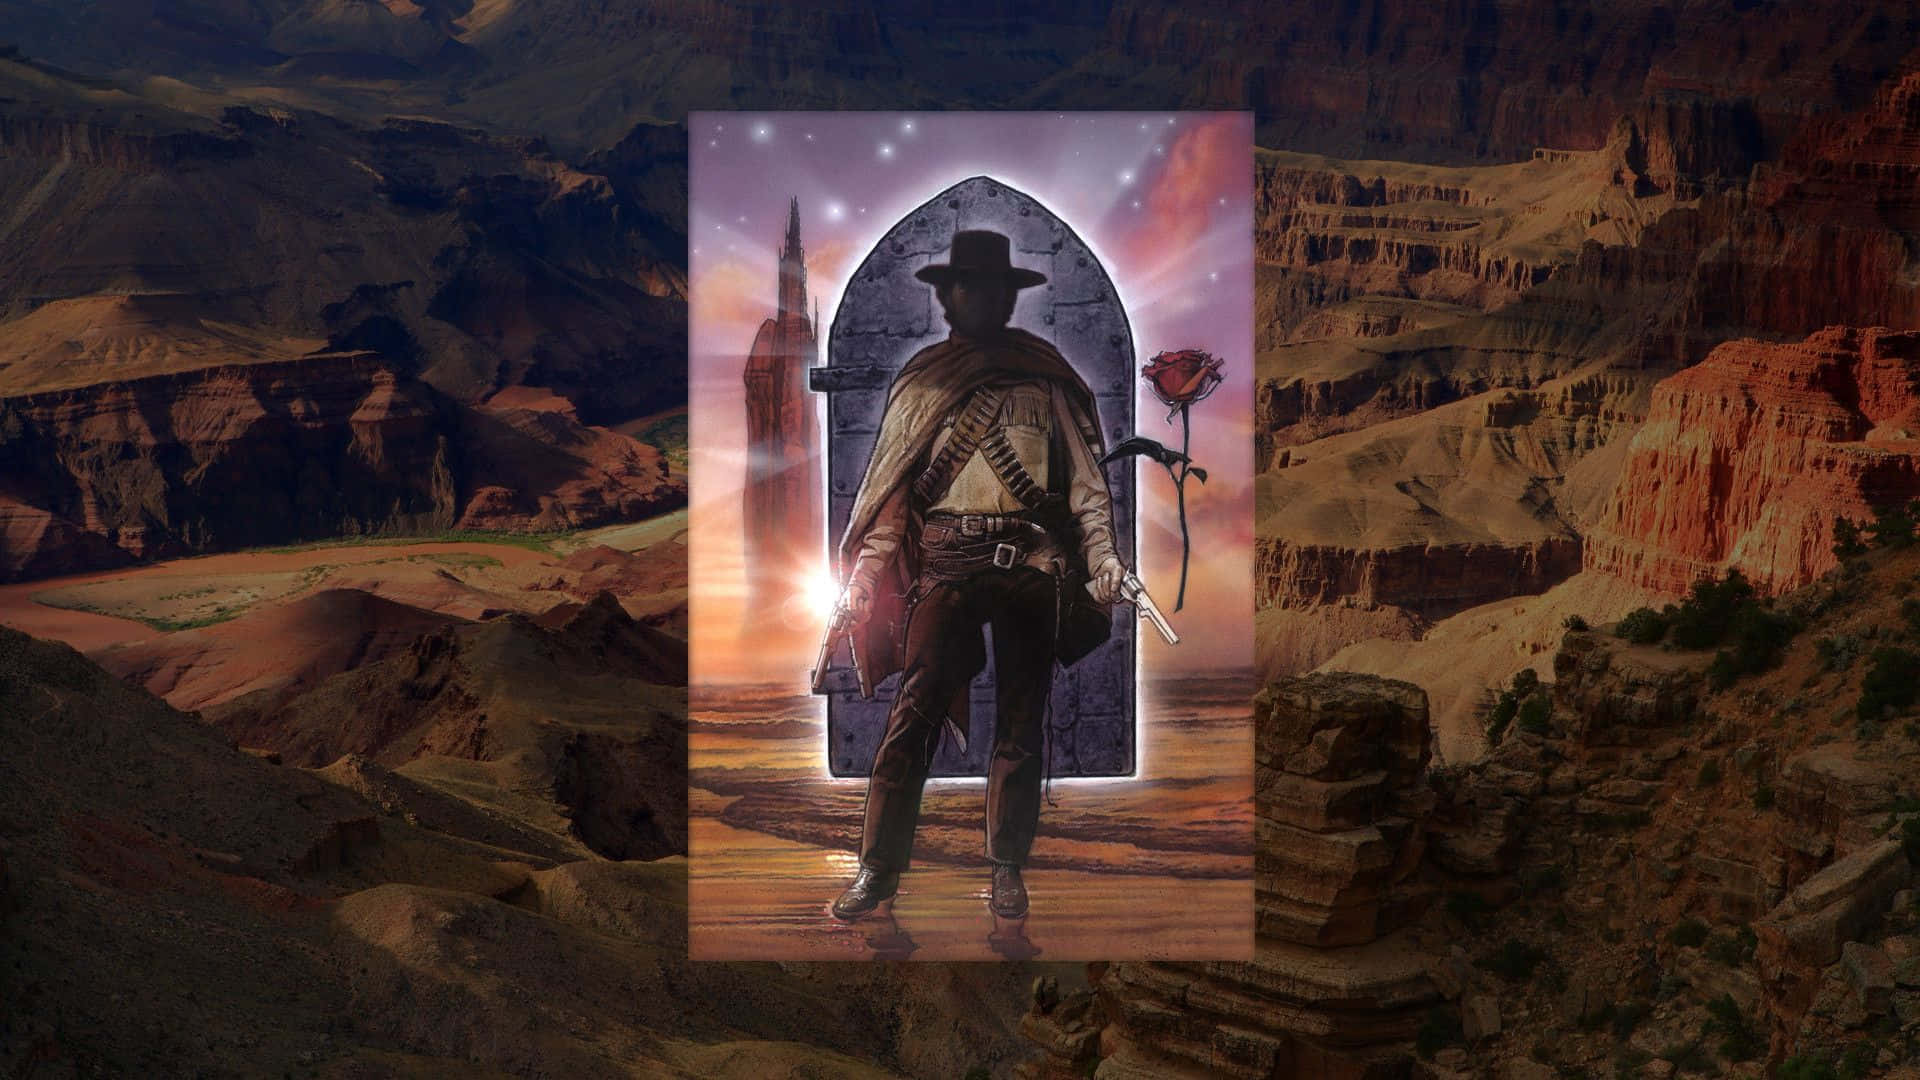 The Dark Tower stands tall and mighty in an eerie landscape Wallpaper